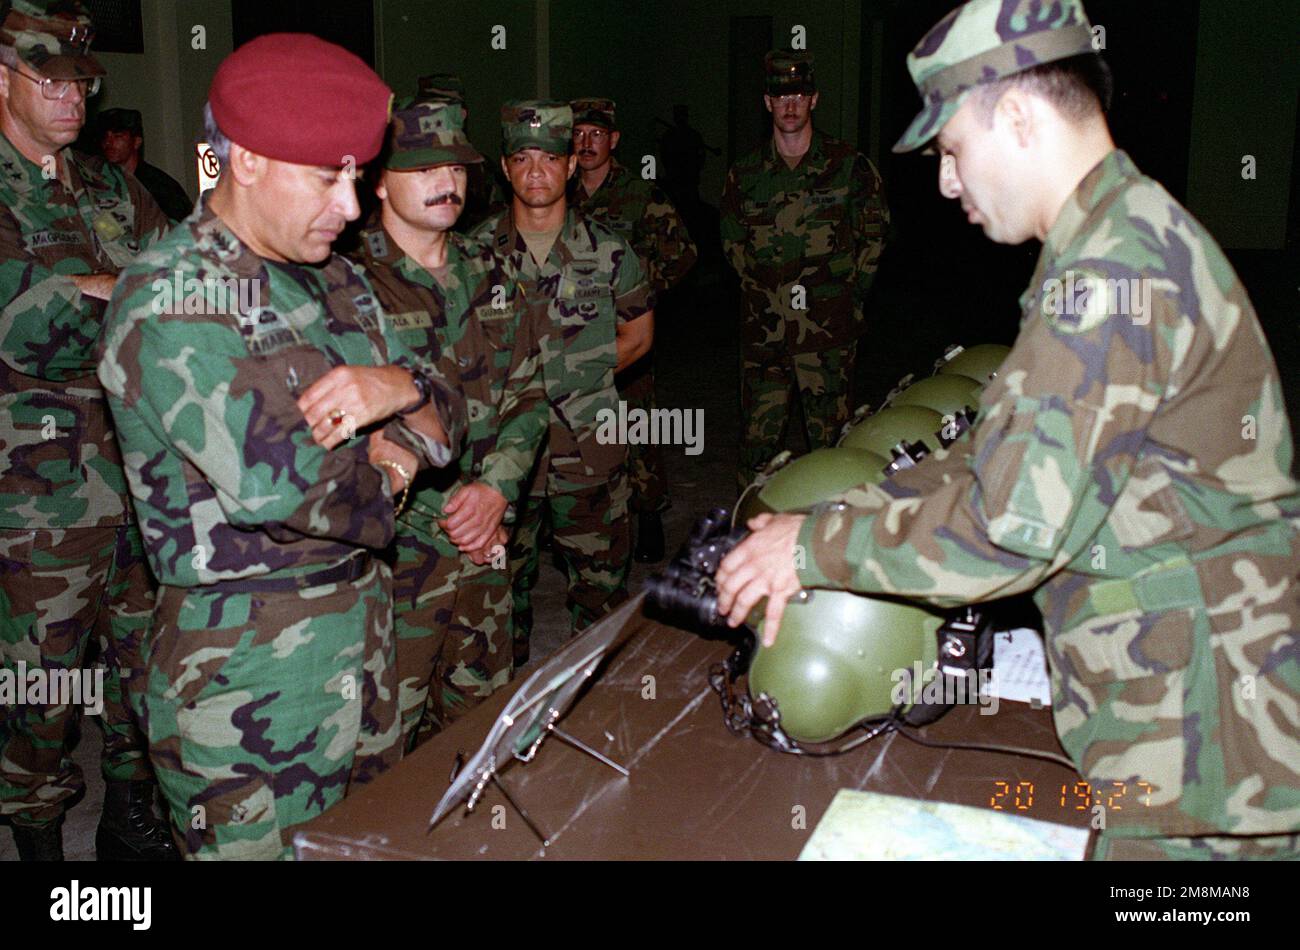 Major General Lawson Magruder III, Commander, Army South, looks on as Brigadier General Sergio Arnoldo Camargo Murralles, CHIEF of STAFF, Guatemalan Army is briefed by CHIEF Warrant Office Montufar on the operation of Night vision (an/vis-6) Goggles installed on a flight helmet. Brig. GEN. Murralles was on a visit to U.S. Army Southern Command. Base: Fort Clayton Country: Panama (PAN) Stock Photo